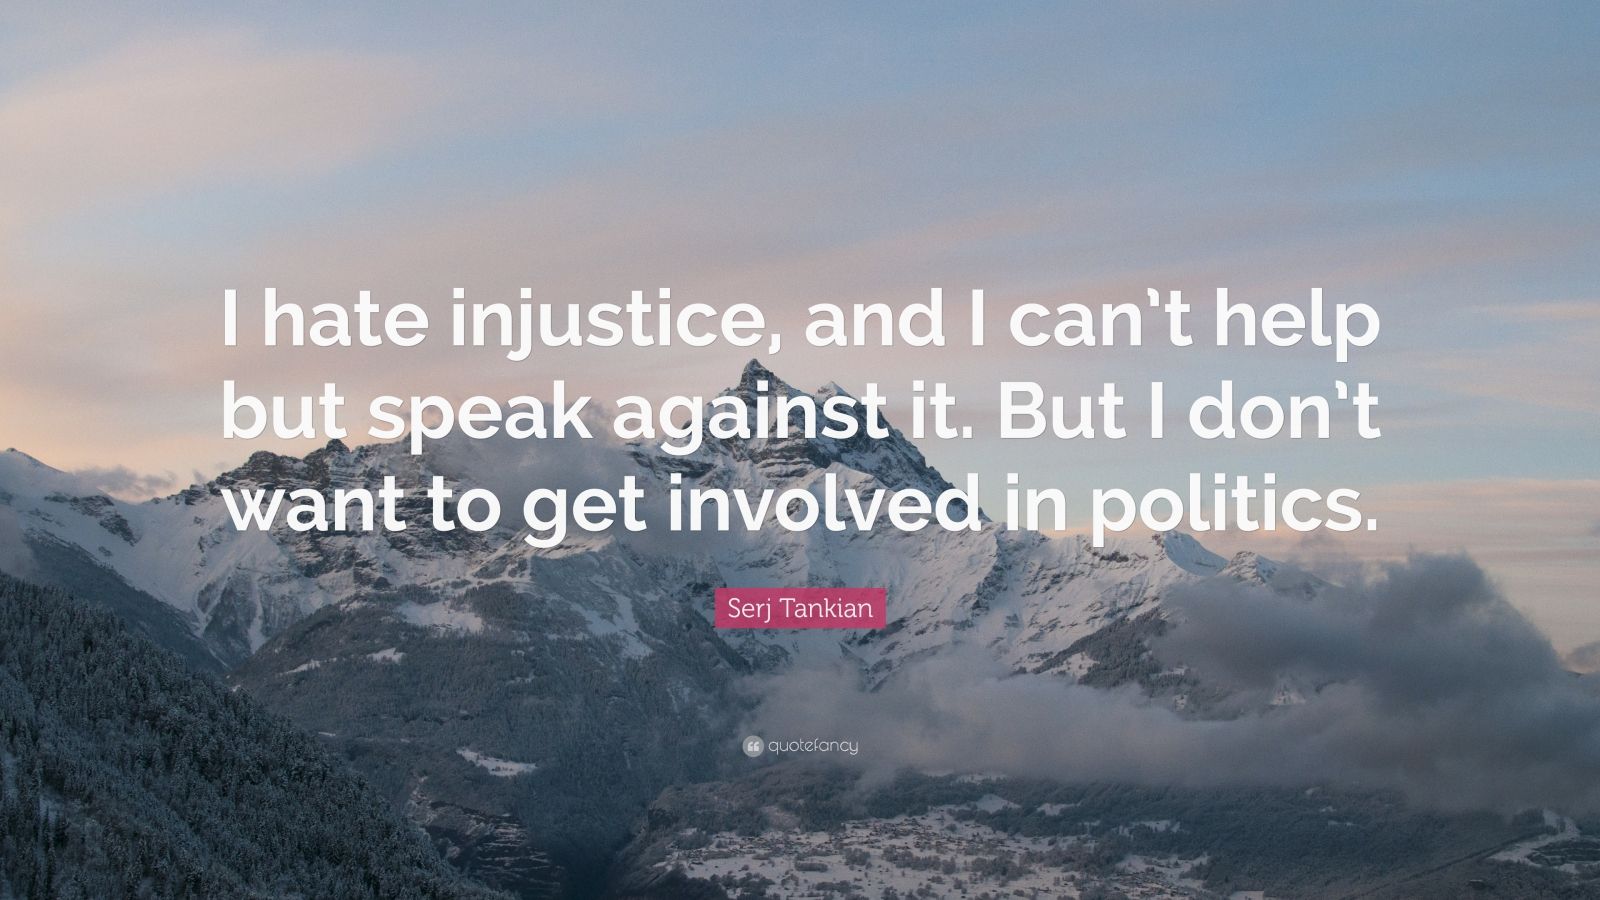 Serj Tankian Quote: “I hate injustice, and I can’t help but speak ...